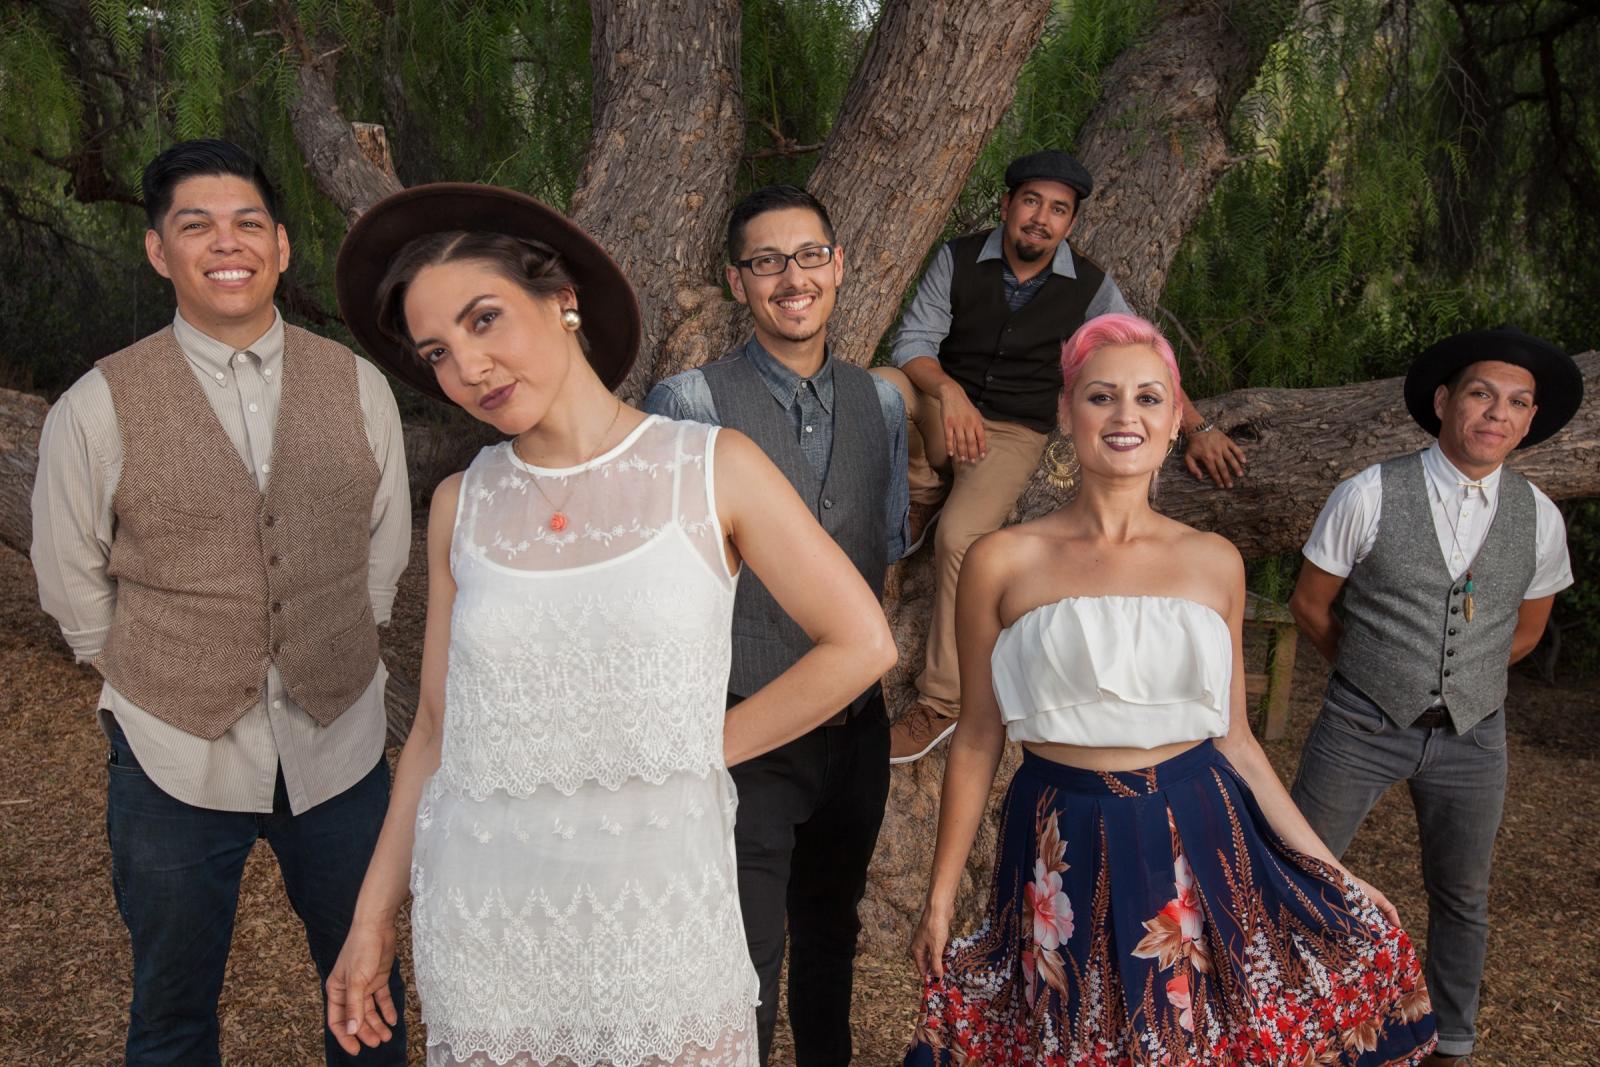 Performing group Las Cafeteras posing in front of a large tree